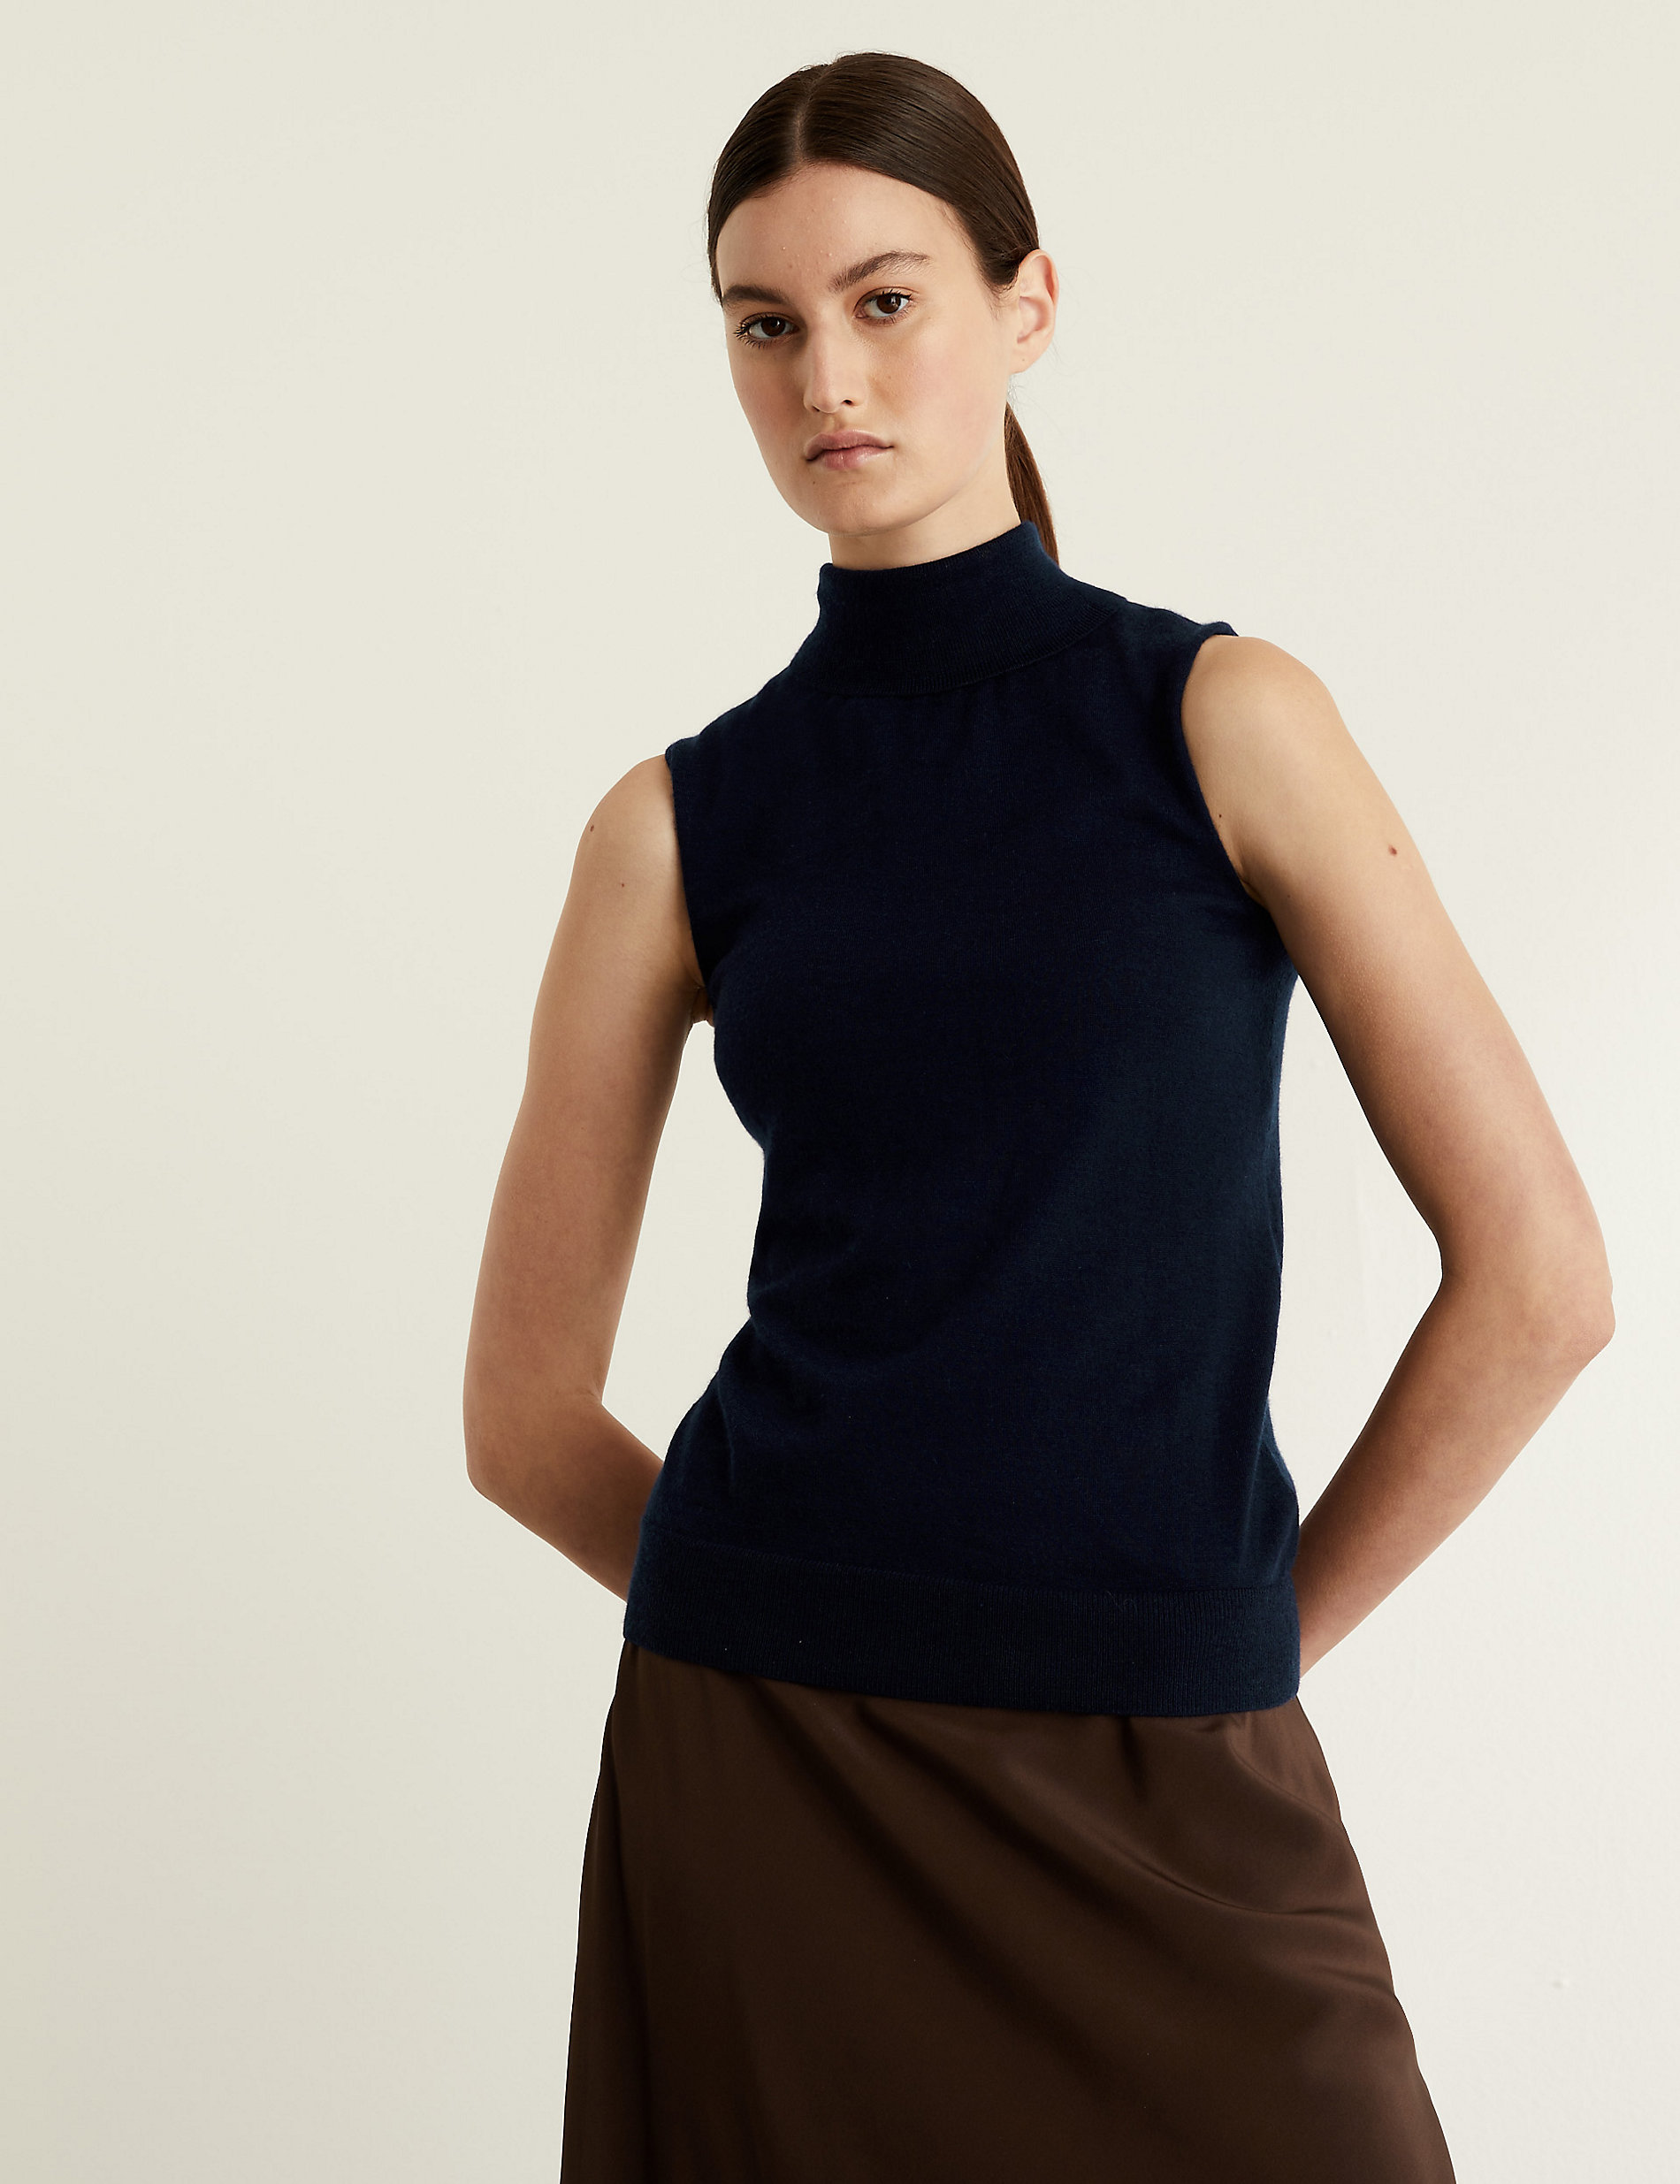 Pure Cashmere Roll Neck Sleeveless Jumper